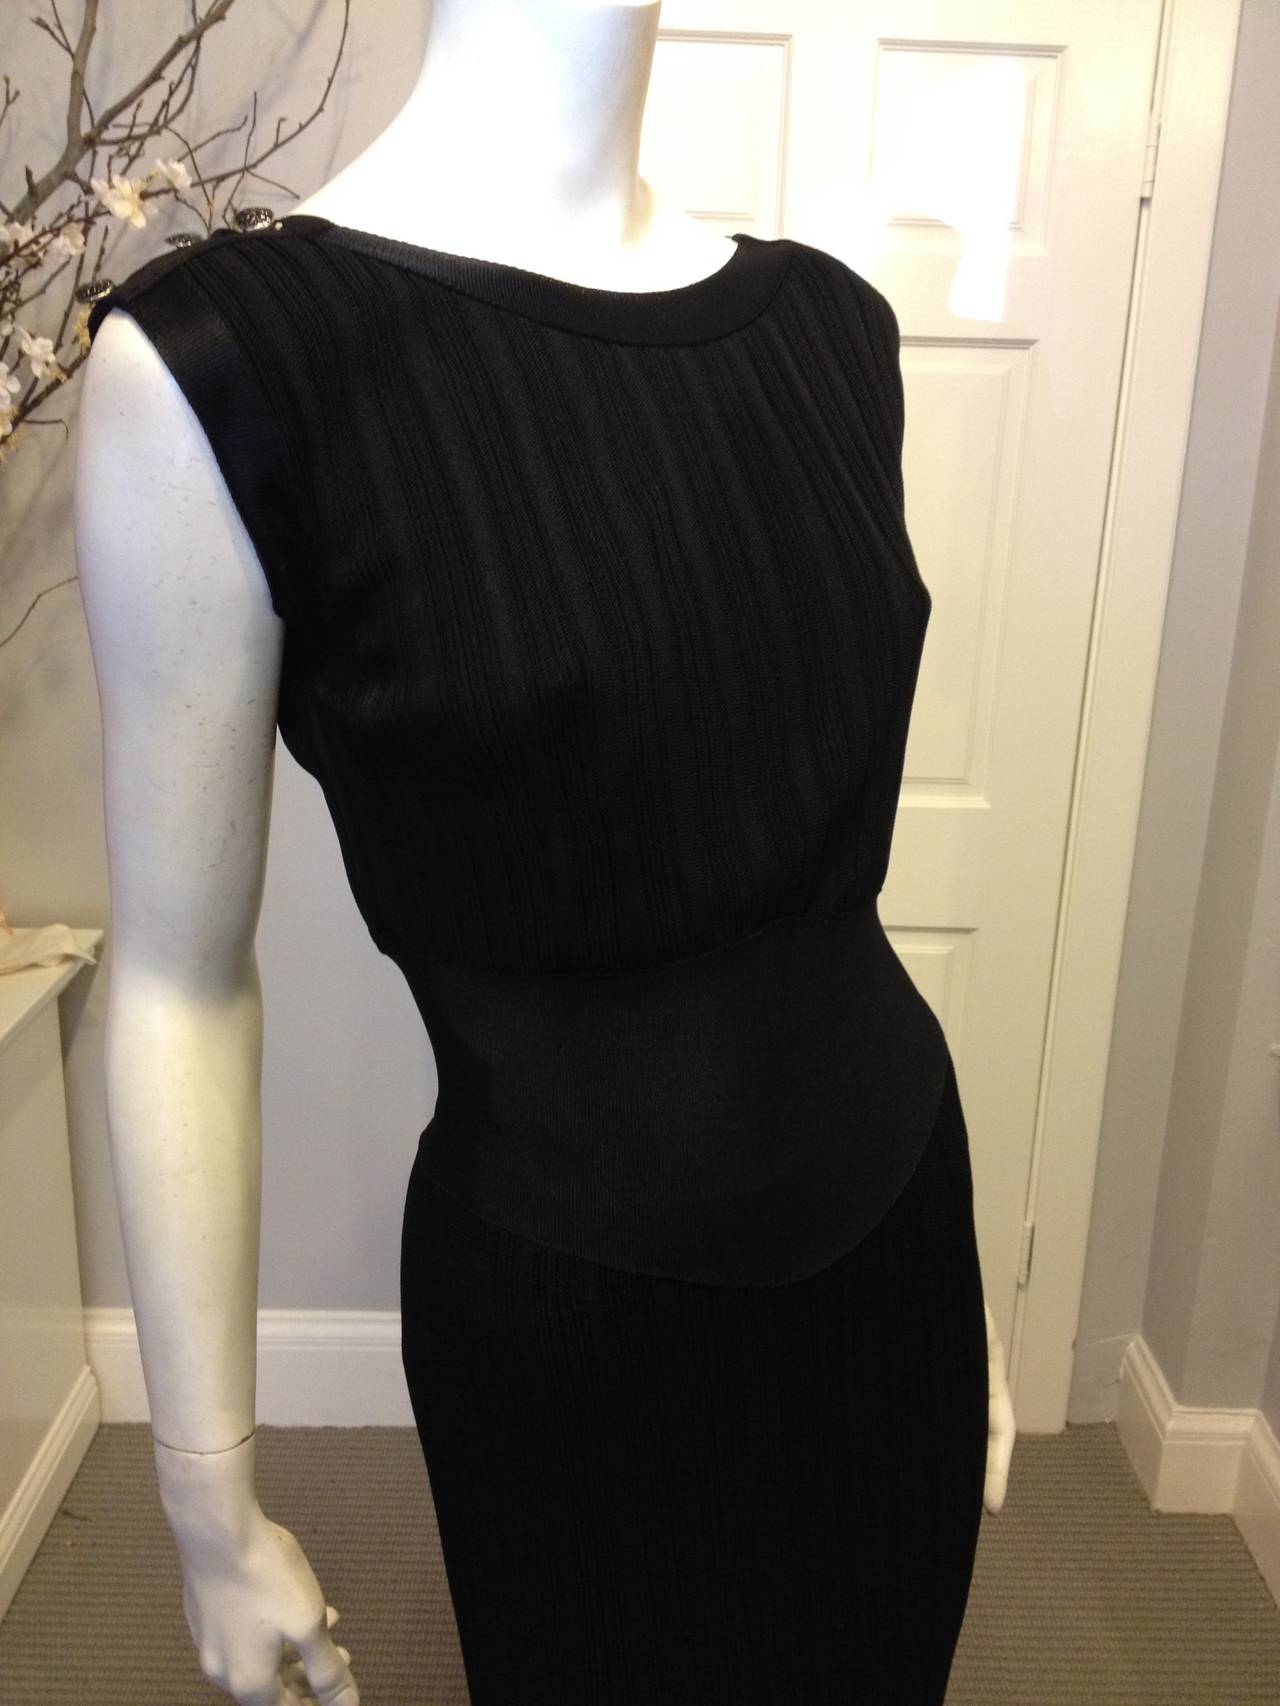 Evoke an old Hollywood starlet in this sweeping Chanel dress. Classically glamorous and always elegant, this piece features a wide boatneck front and a deep scoop back, falling into a gently loose top. The wide waistband, in a contrastingly flat